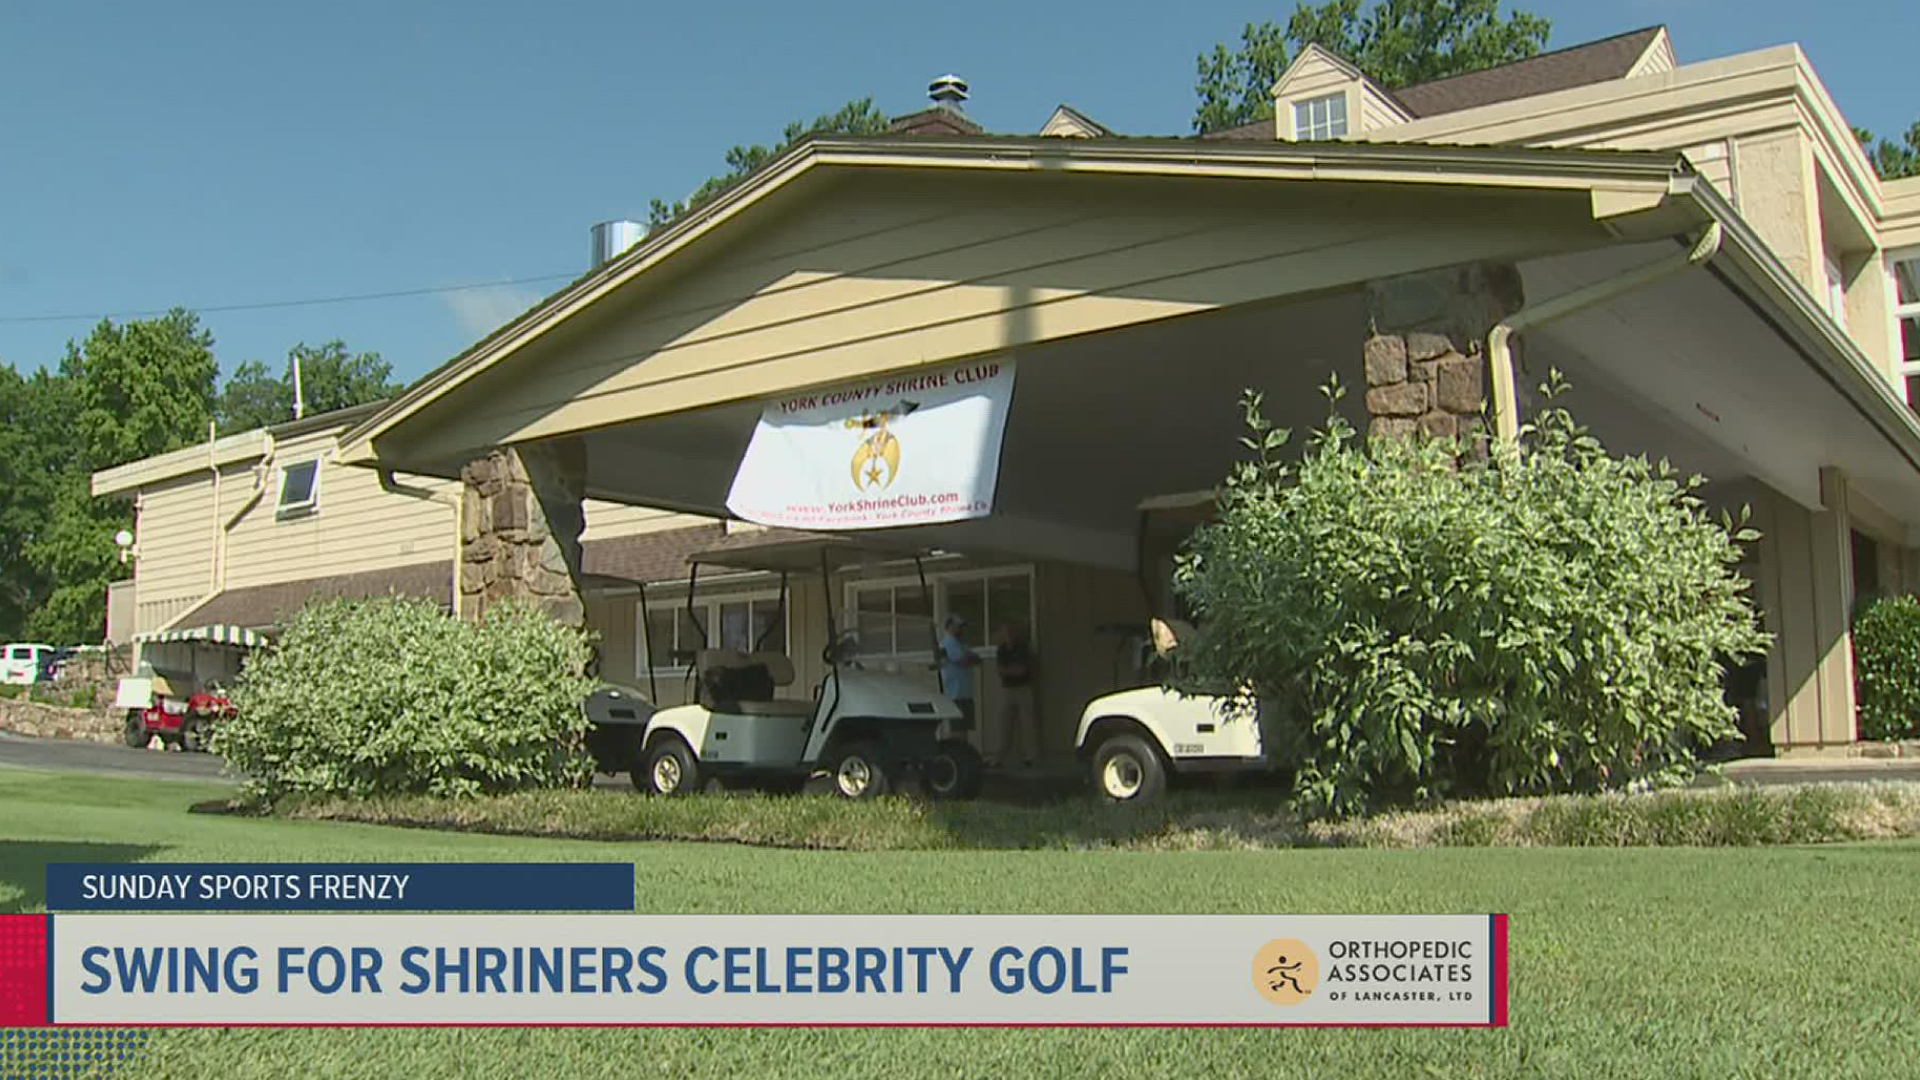 Local sports celebrities participated to help raise money for The Shriners Children Hospital of Philadelphia